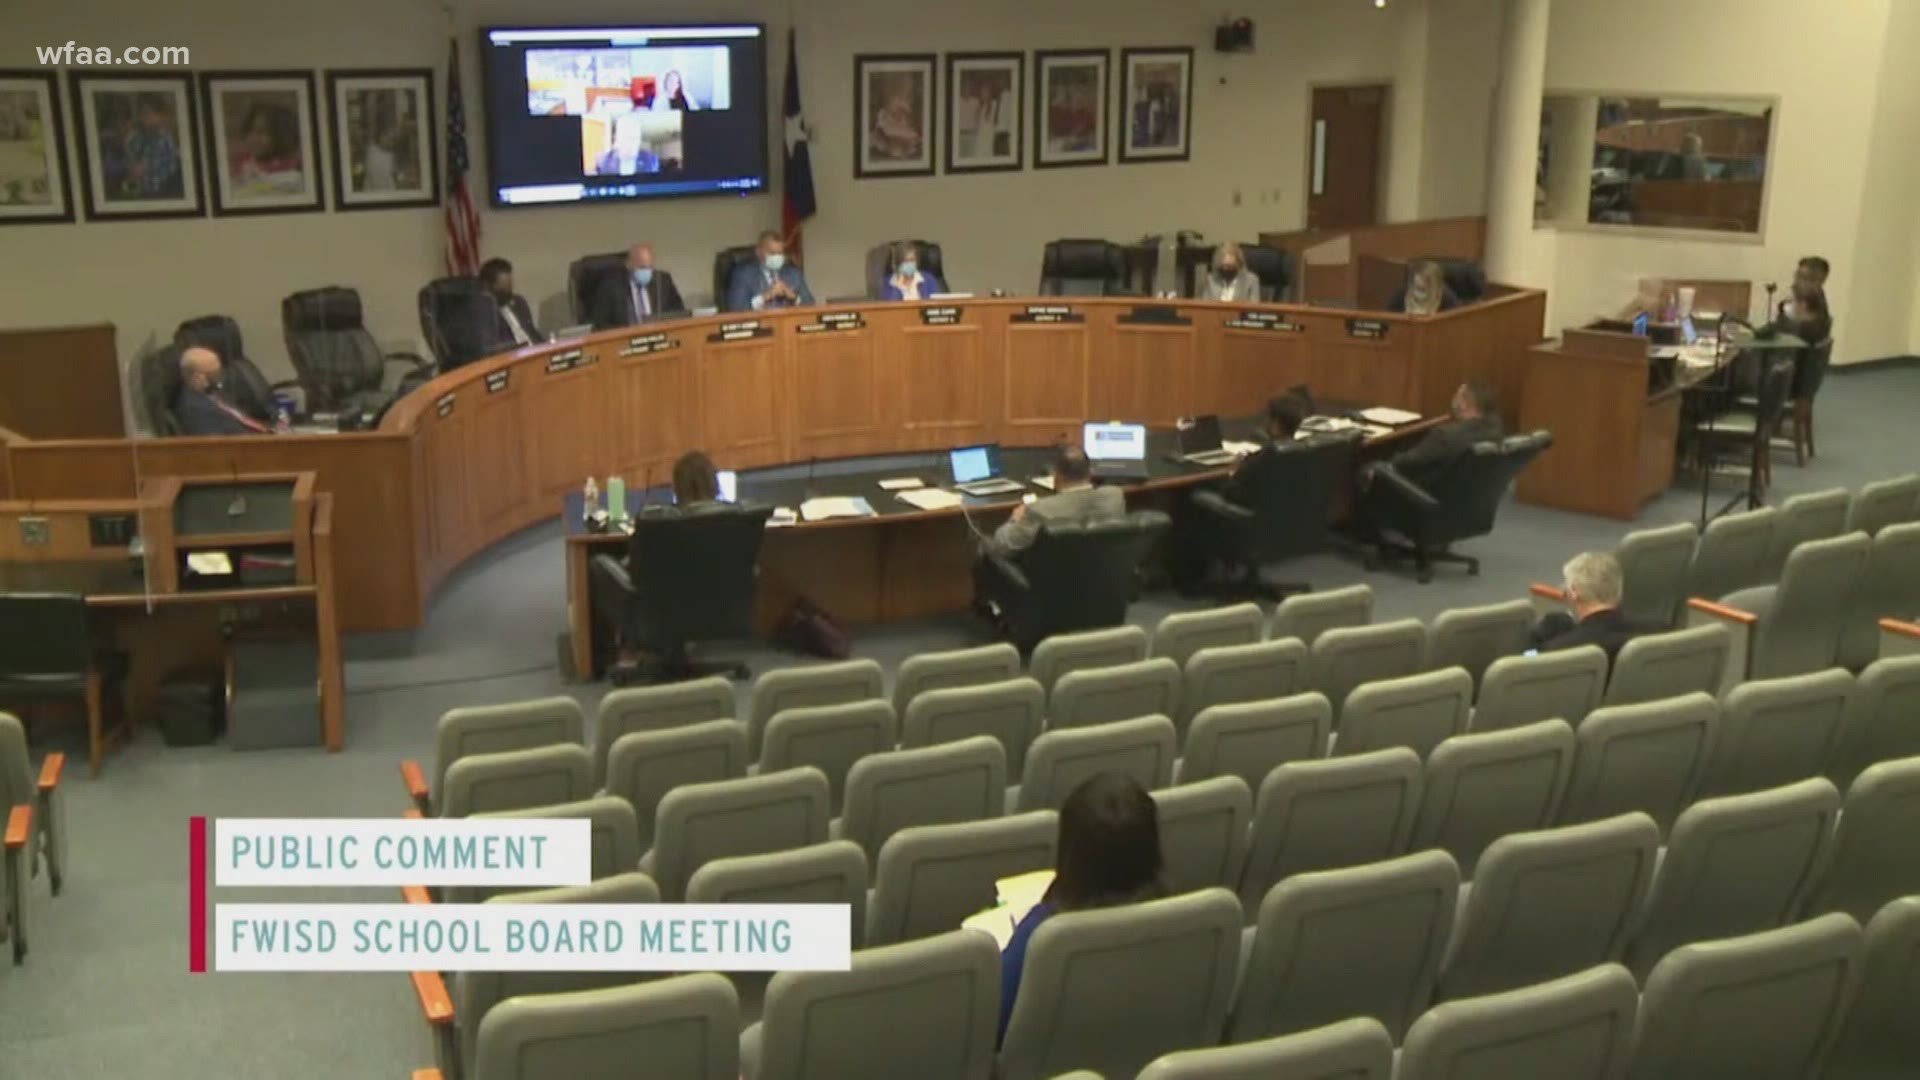 The board voted 5-4 not to extend virtual learning early Wednesday morning.